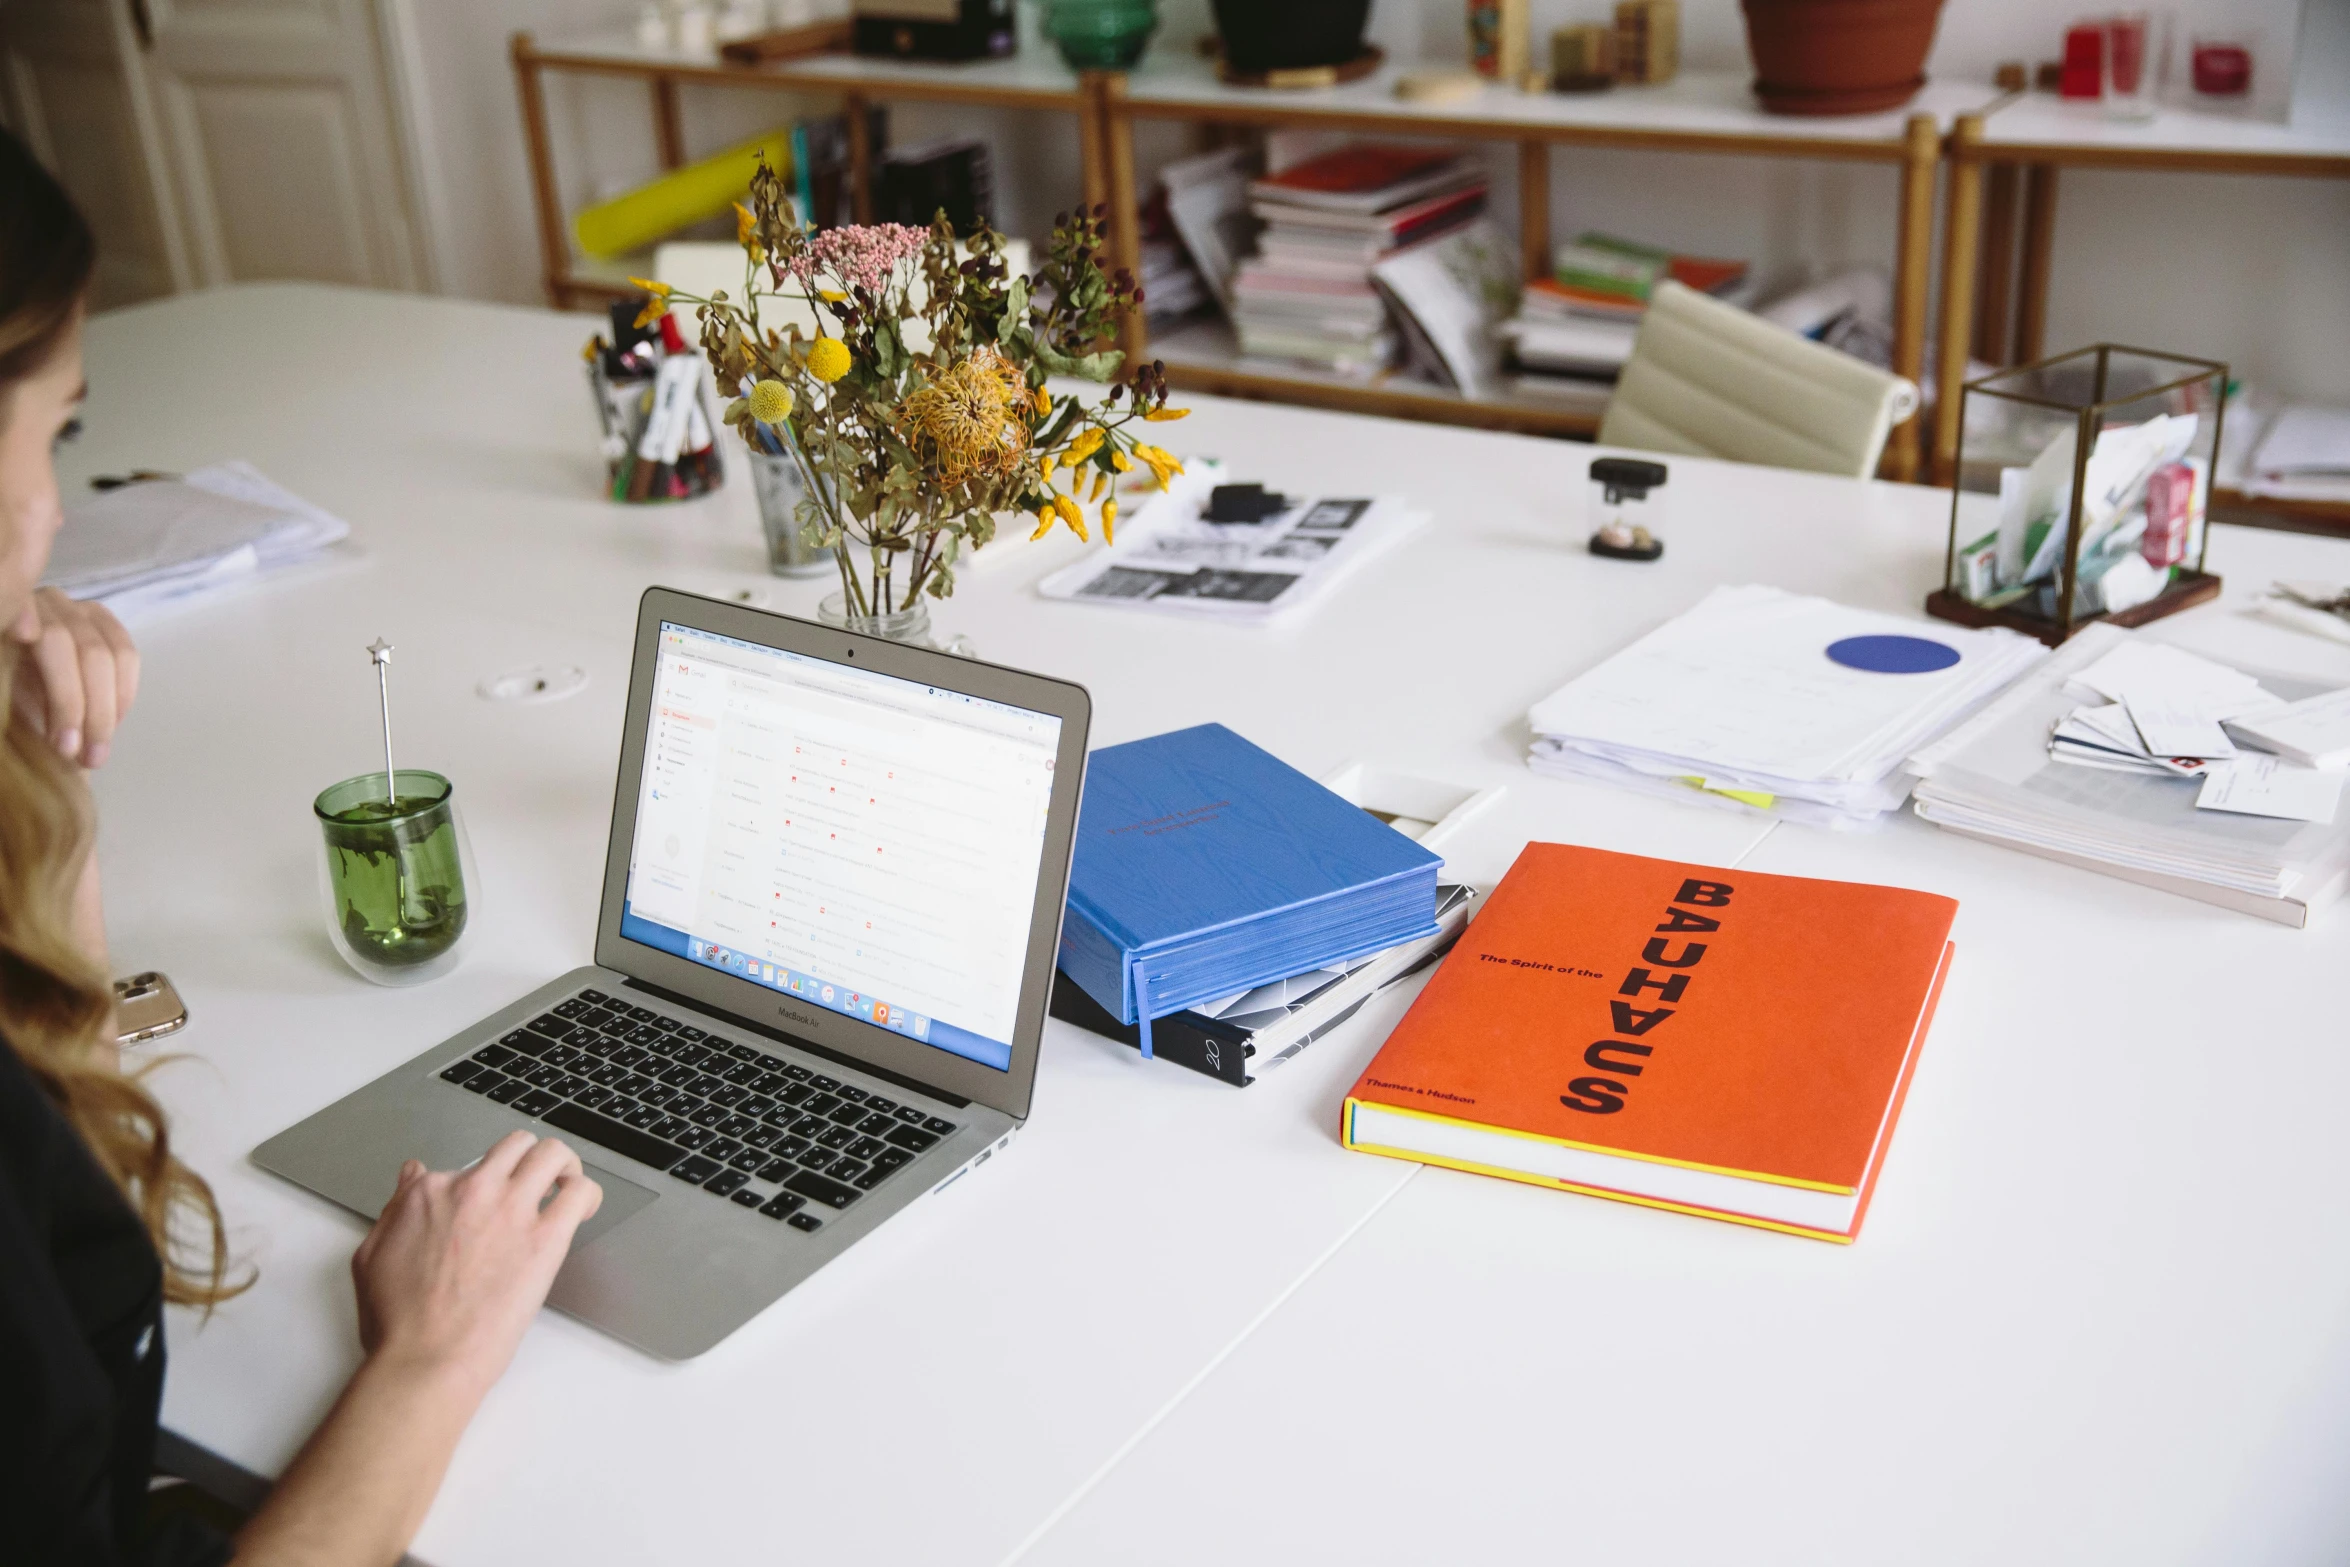 a woman sitting at a table with a laptop computer, an album cover, unsplash, arbeitsrat für kunst, in an office, 9 9 designs, swedish writing, stack of books on side table